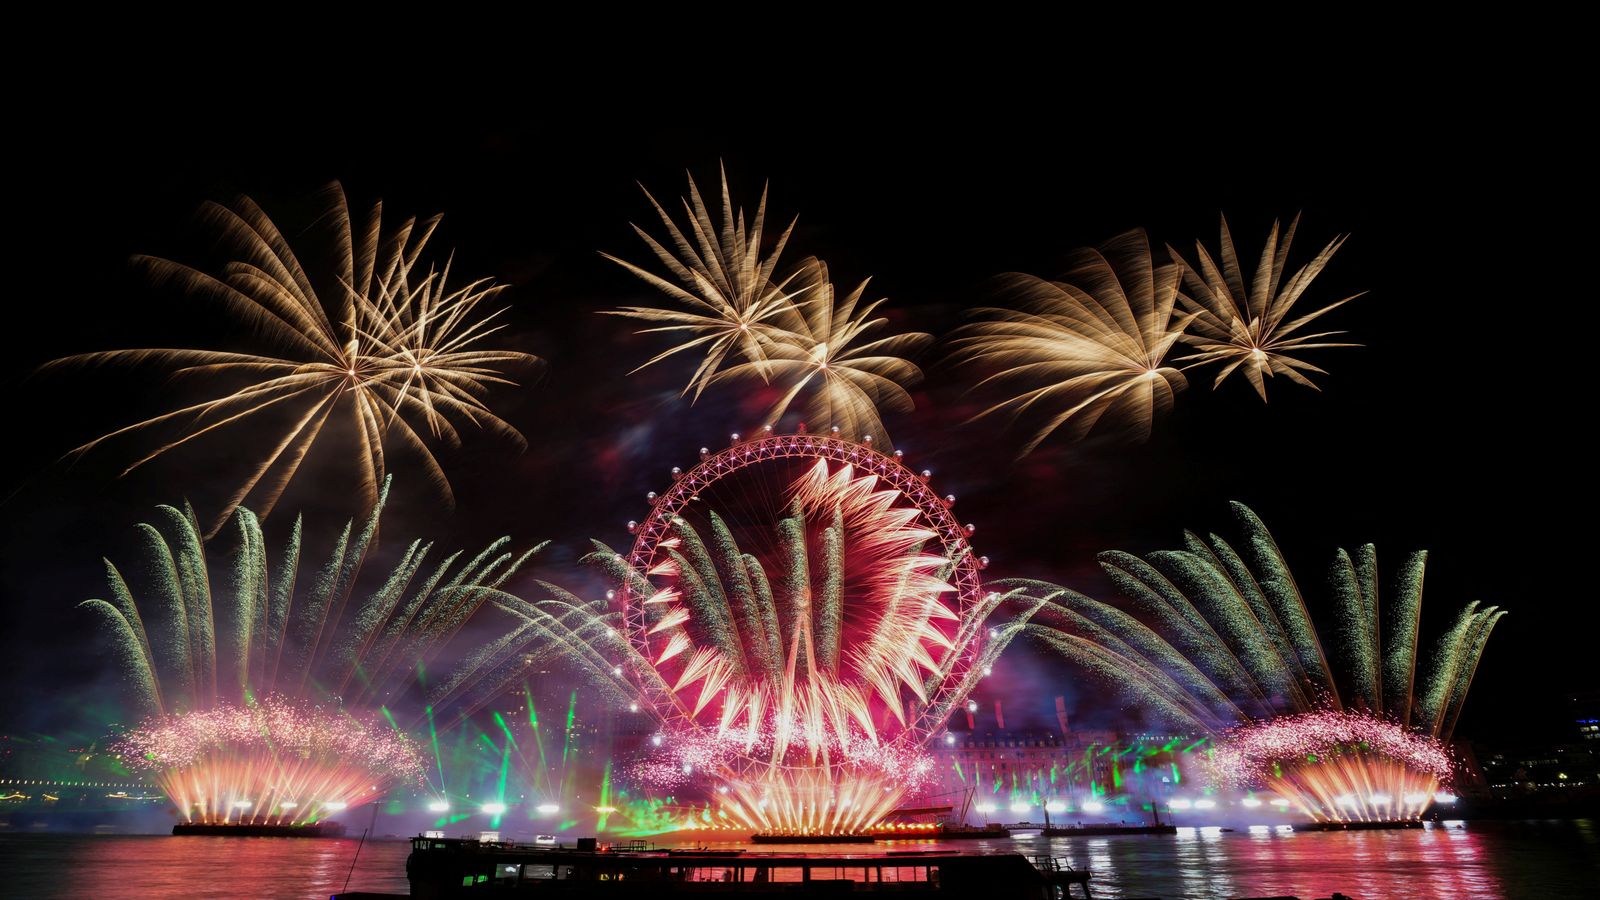 London's New Year fireworks include tribute to the Queen and show of support for Ukraine